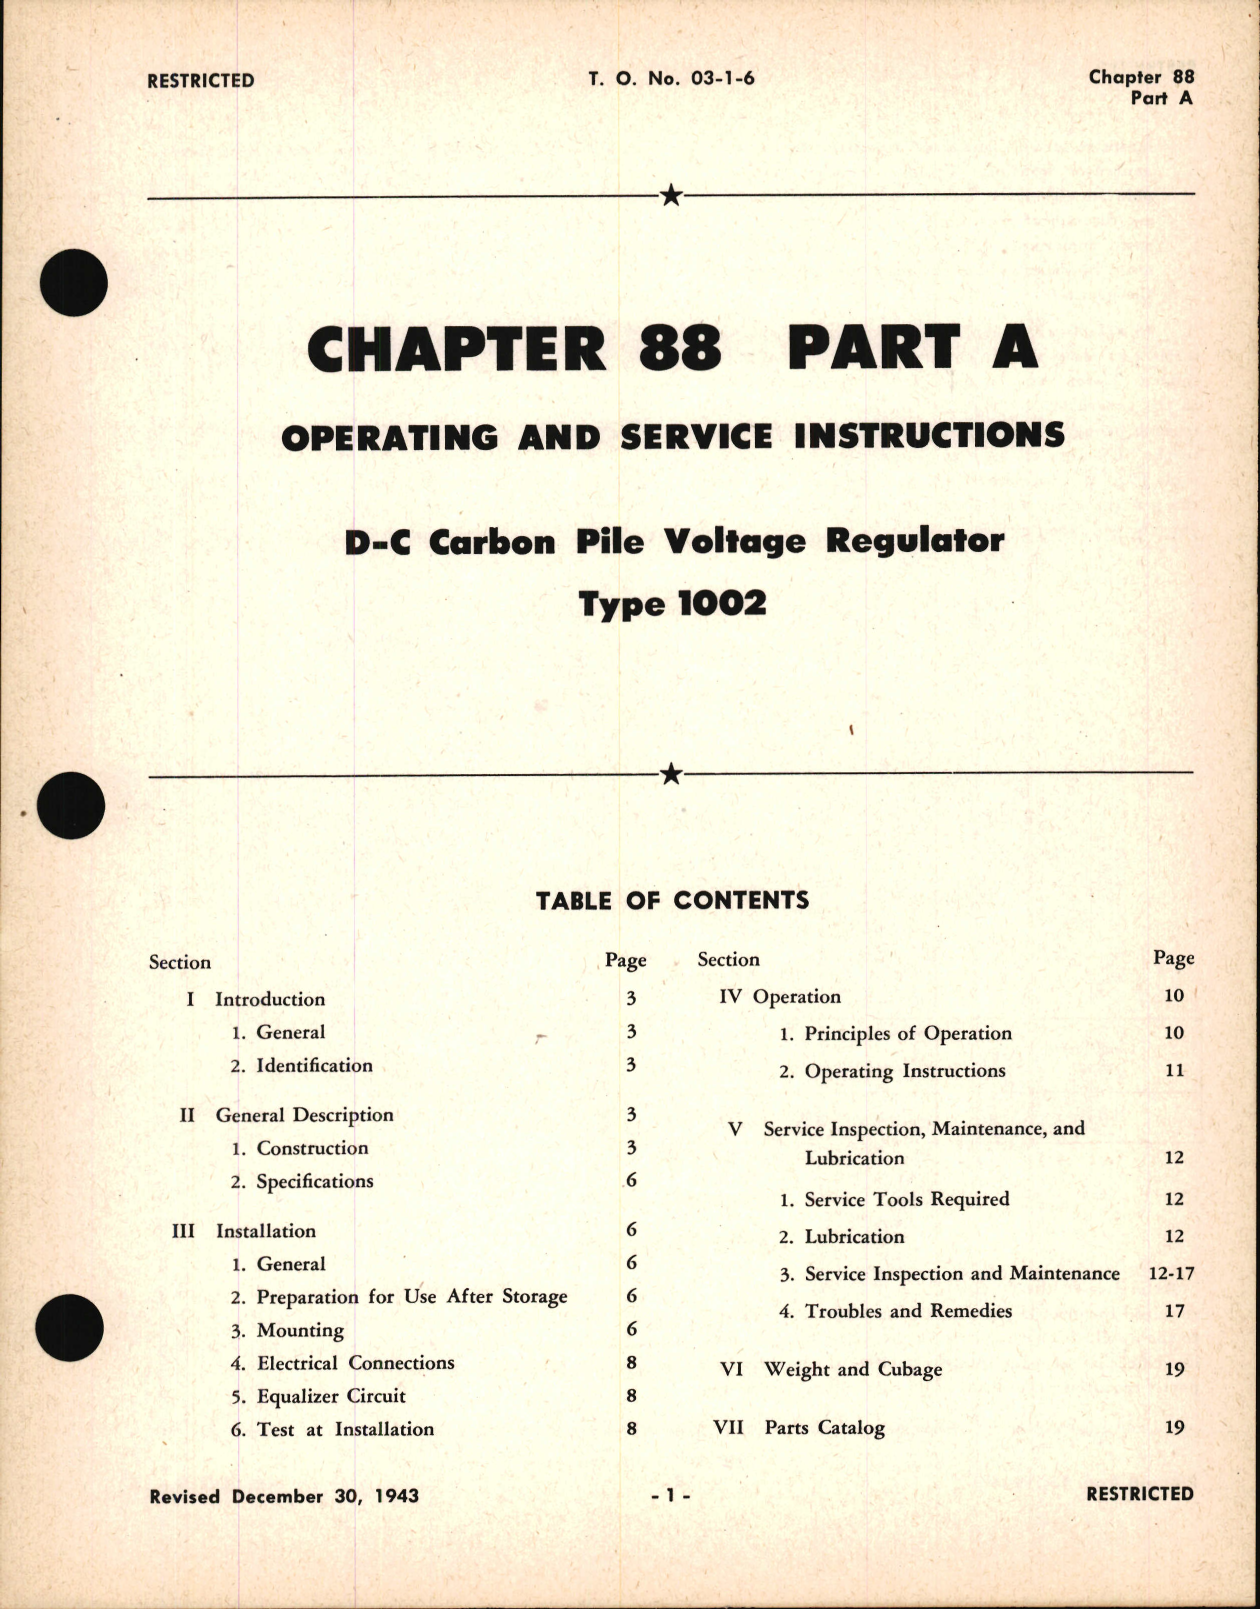 Sample page 1 from AirCorps Library document: Operating and Service Instructions for D-C Carbon Pile Voltage Regulator, Type 1002, Ch 88 Part A